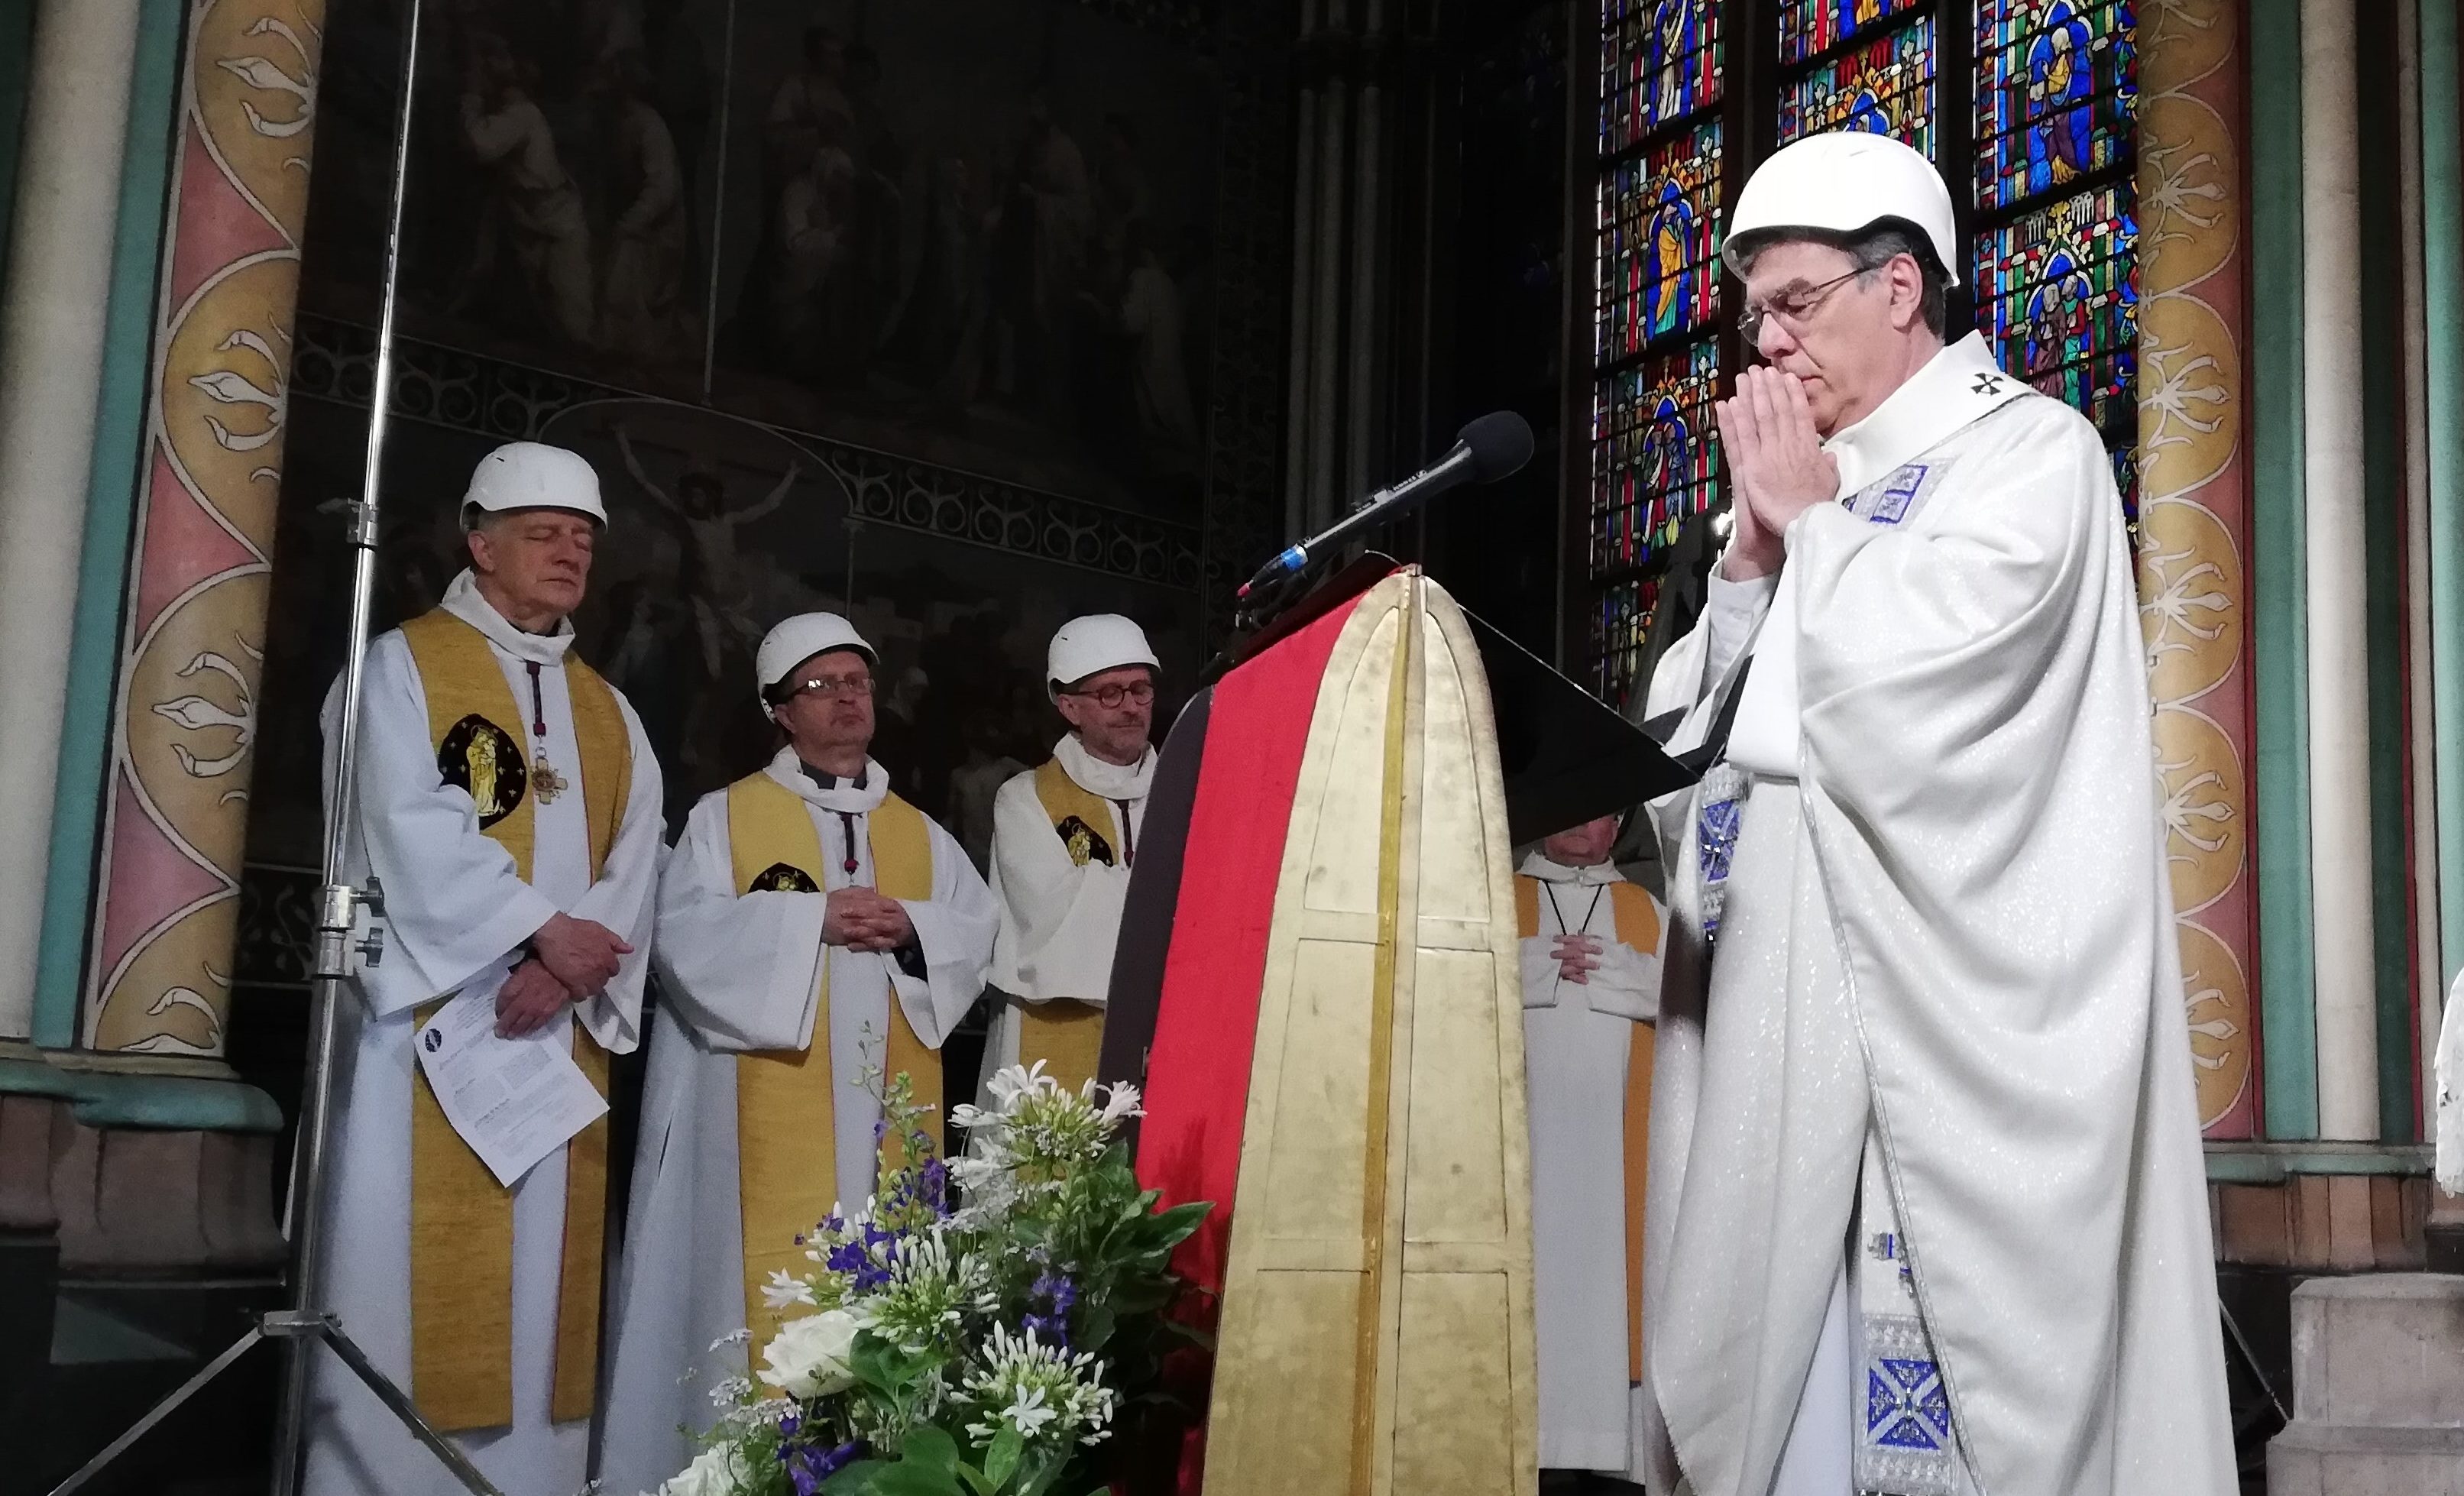 Pirests in hard hats host first mass in Notre Dame since April inferno